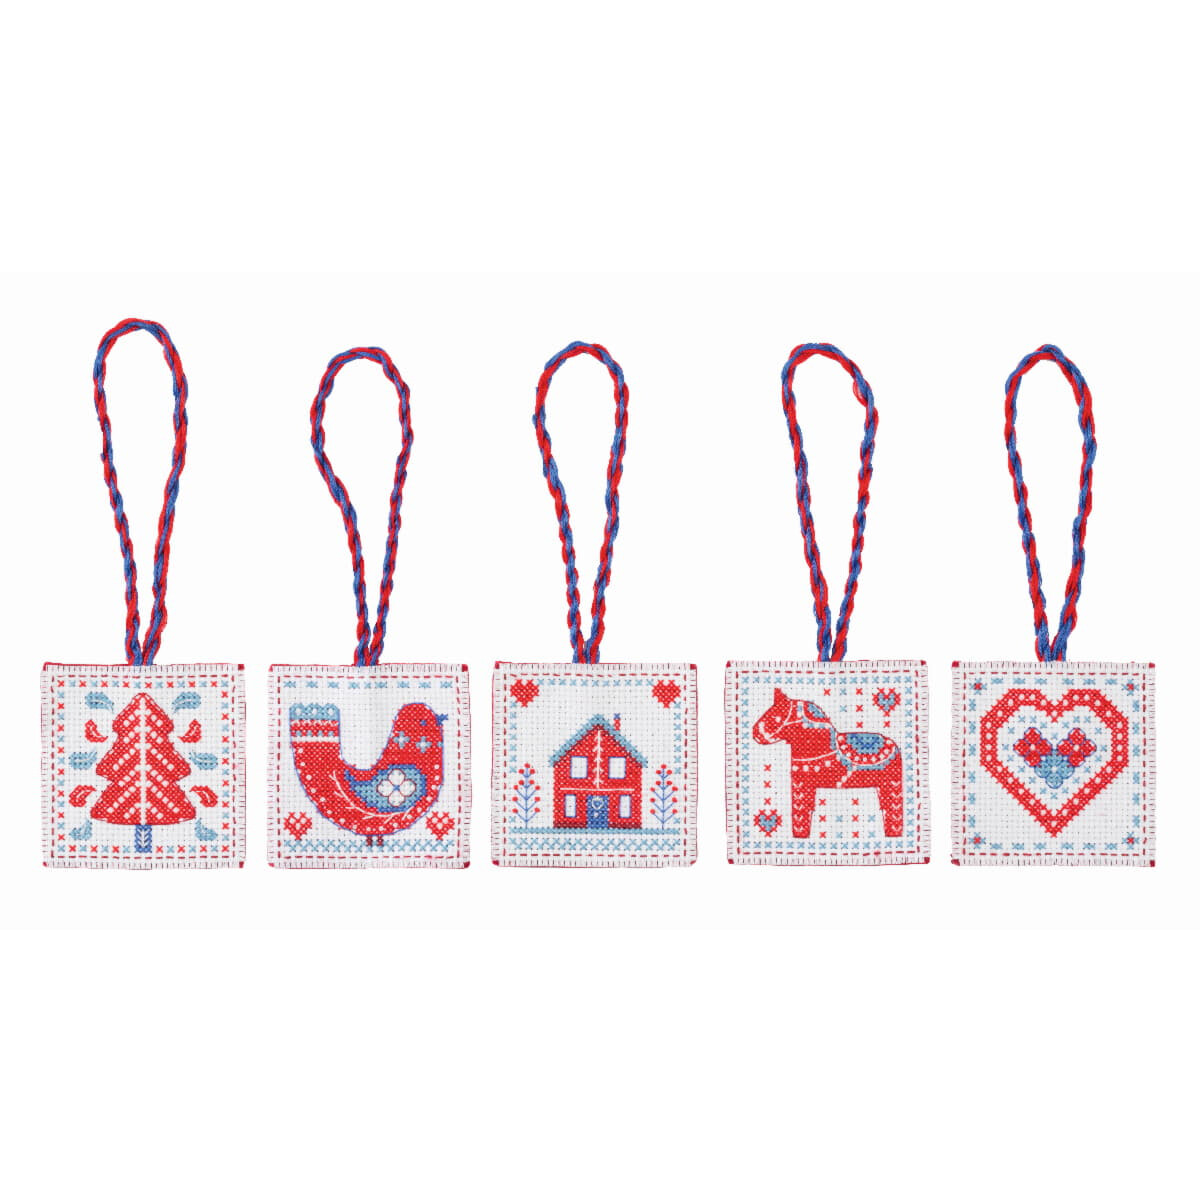 Anchortelpakket "Nordic Decorations Red and Blue...